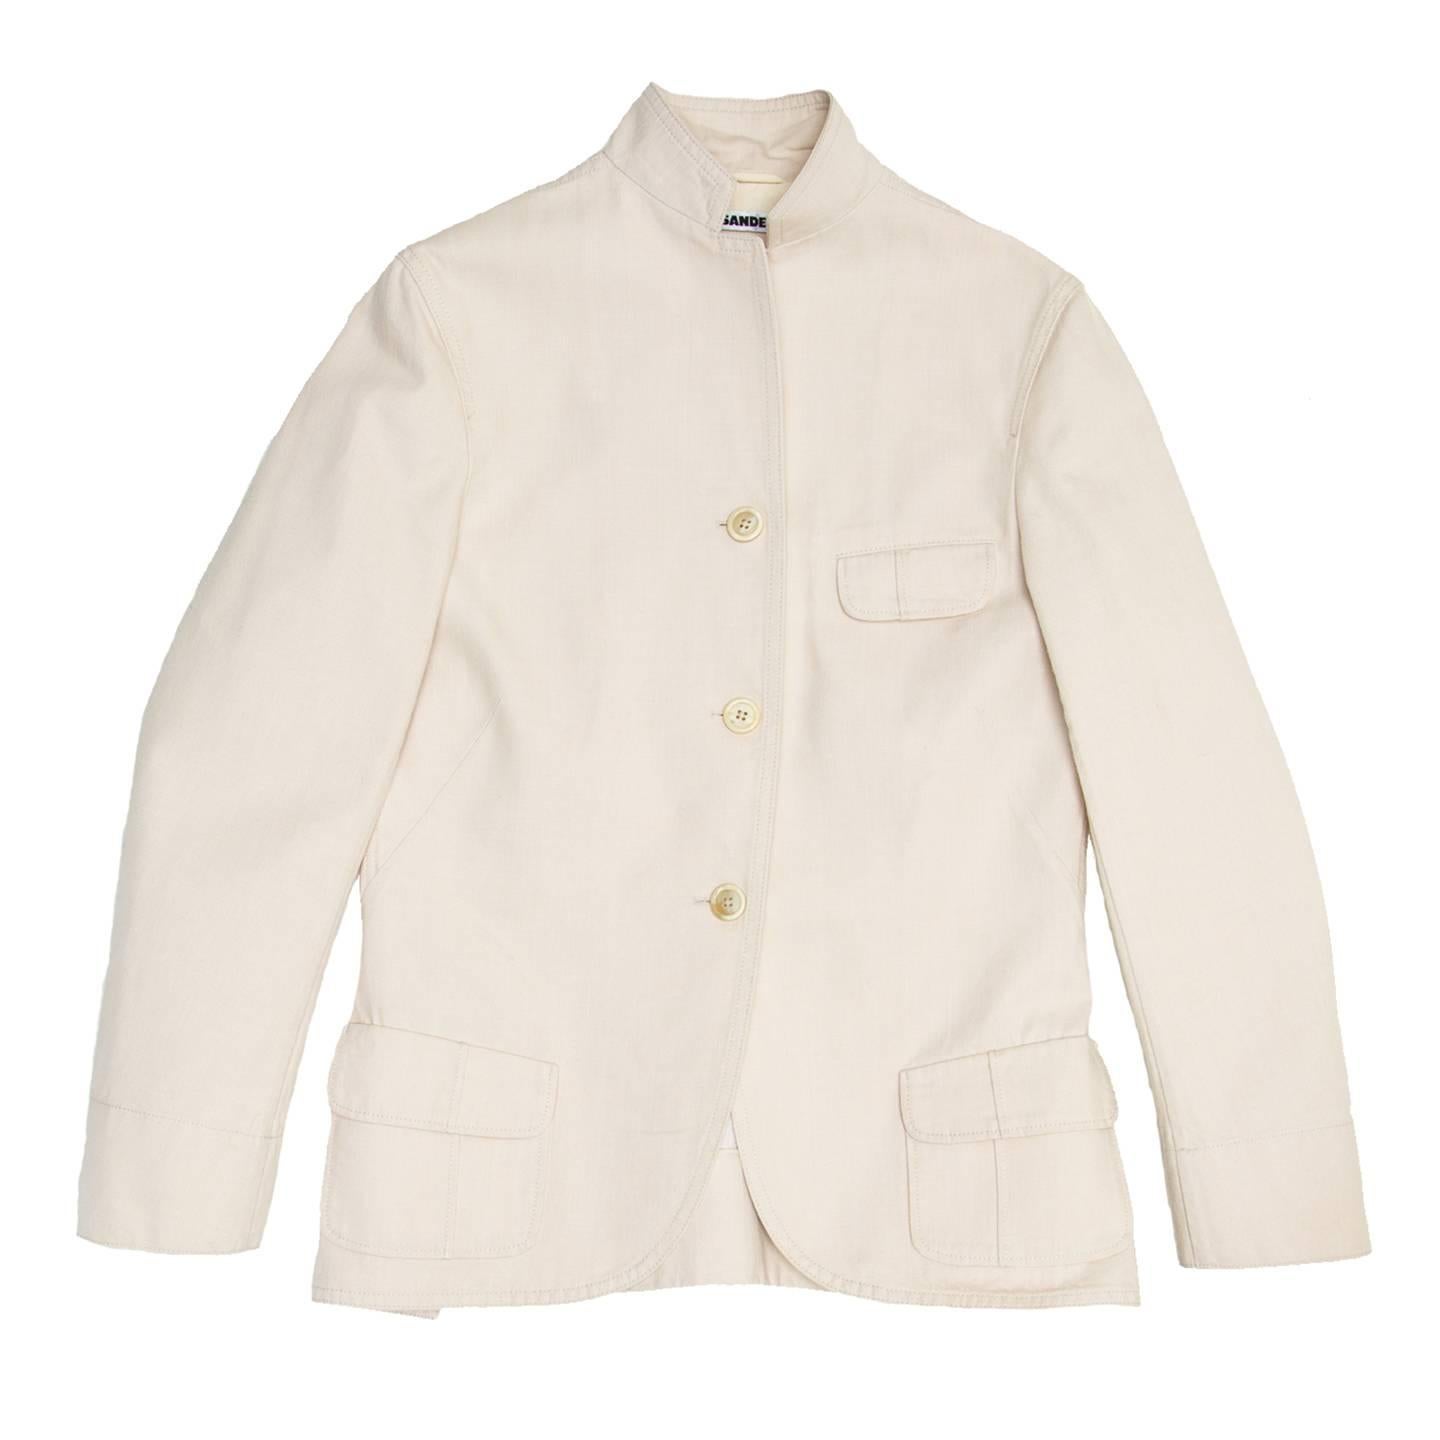 Ivory cotton jacket with a 3 button closure and small lapel. The blazer has a quite long casual style, with a little flap pocket at bust and slanted flap pockets on patch pockets at waist. The back vents are a continuation of the front darts, they